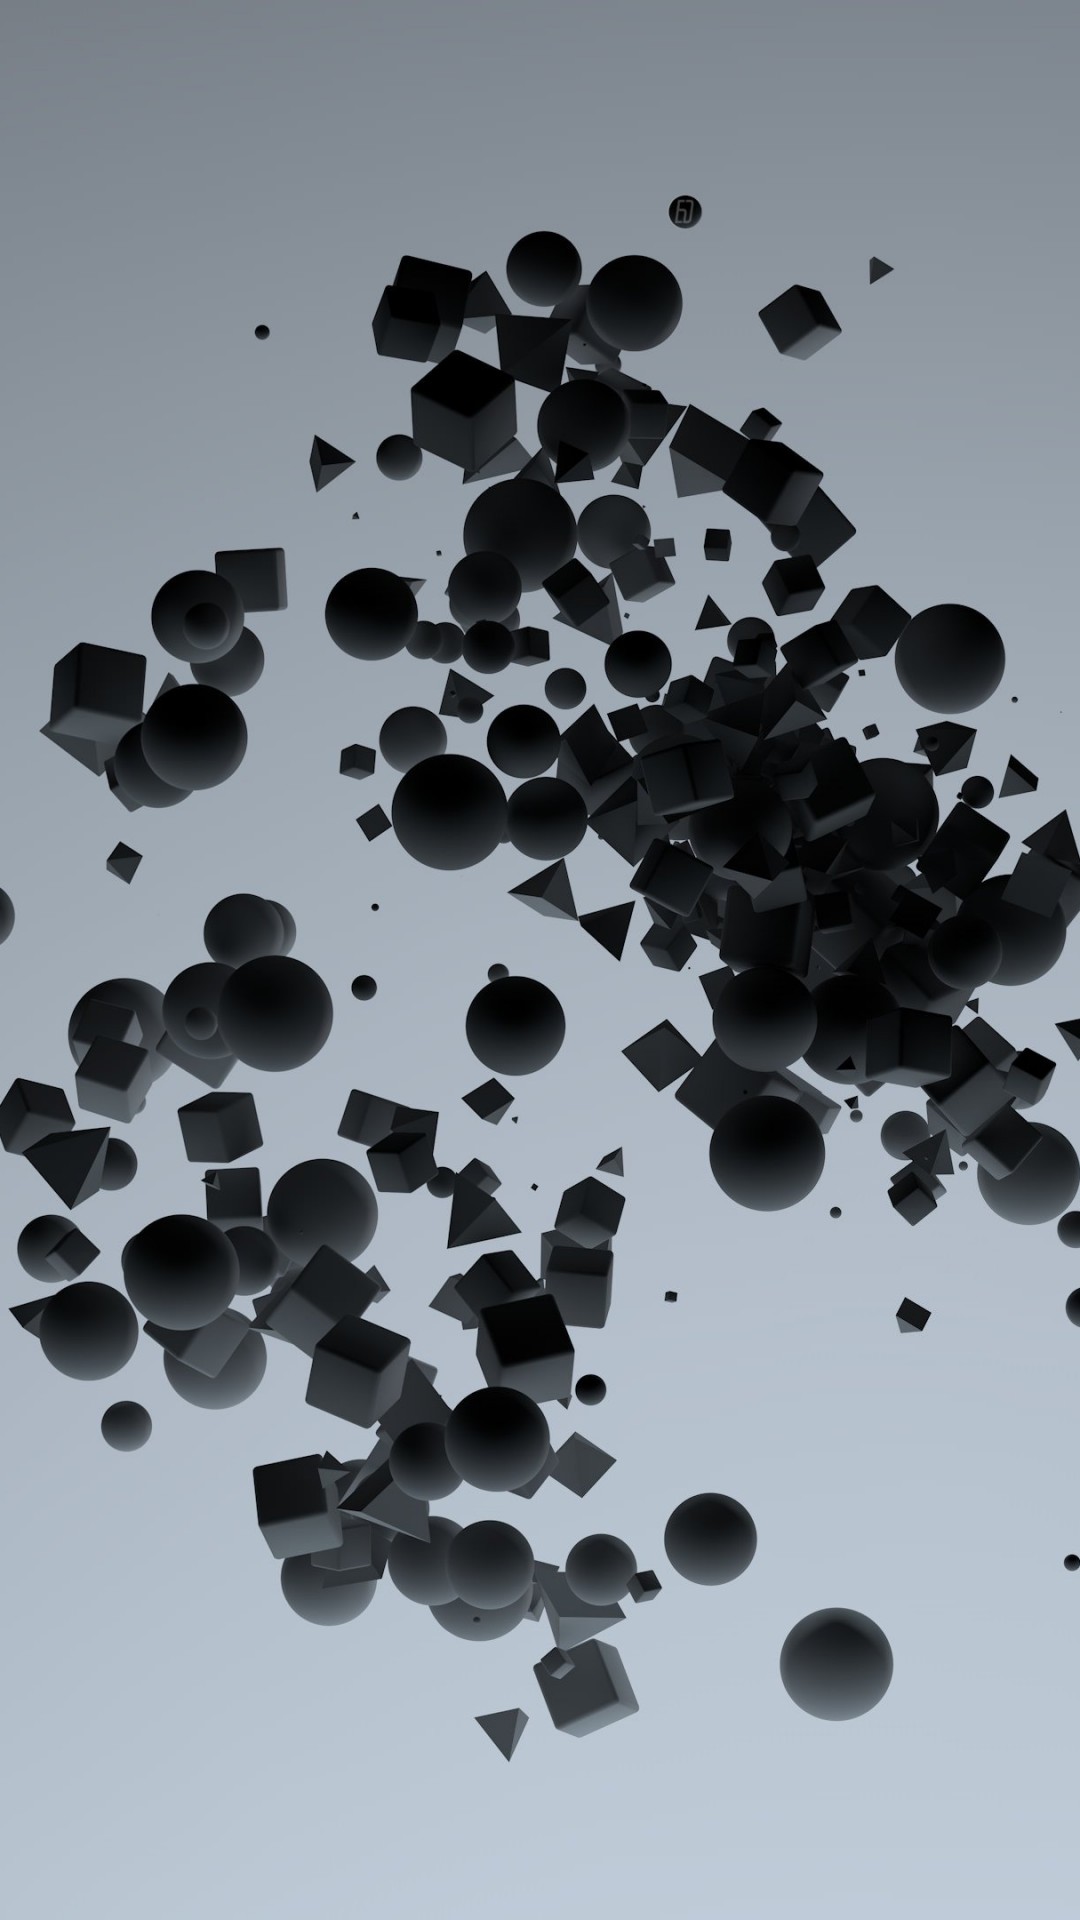 Floating Shapes Wallpaper for HTC One